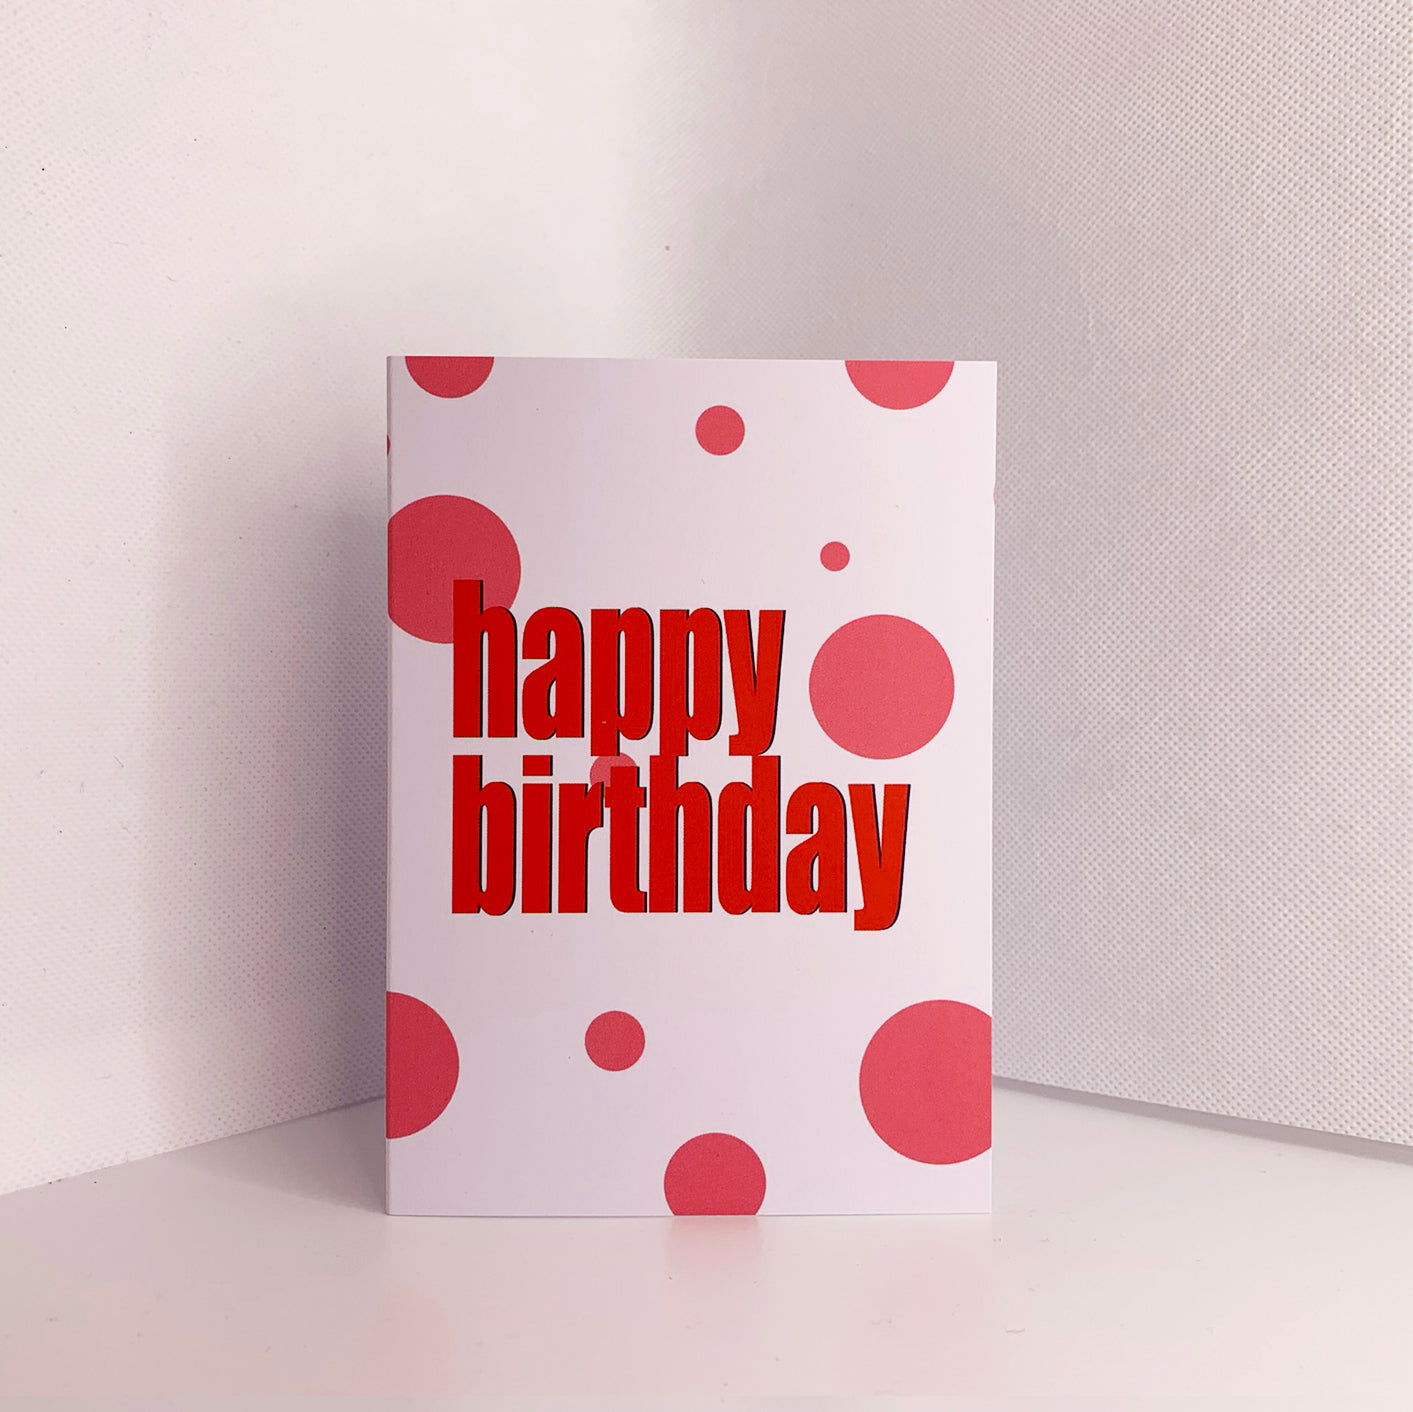 Happy Birthday - Greetings Card - red & pink on white